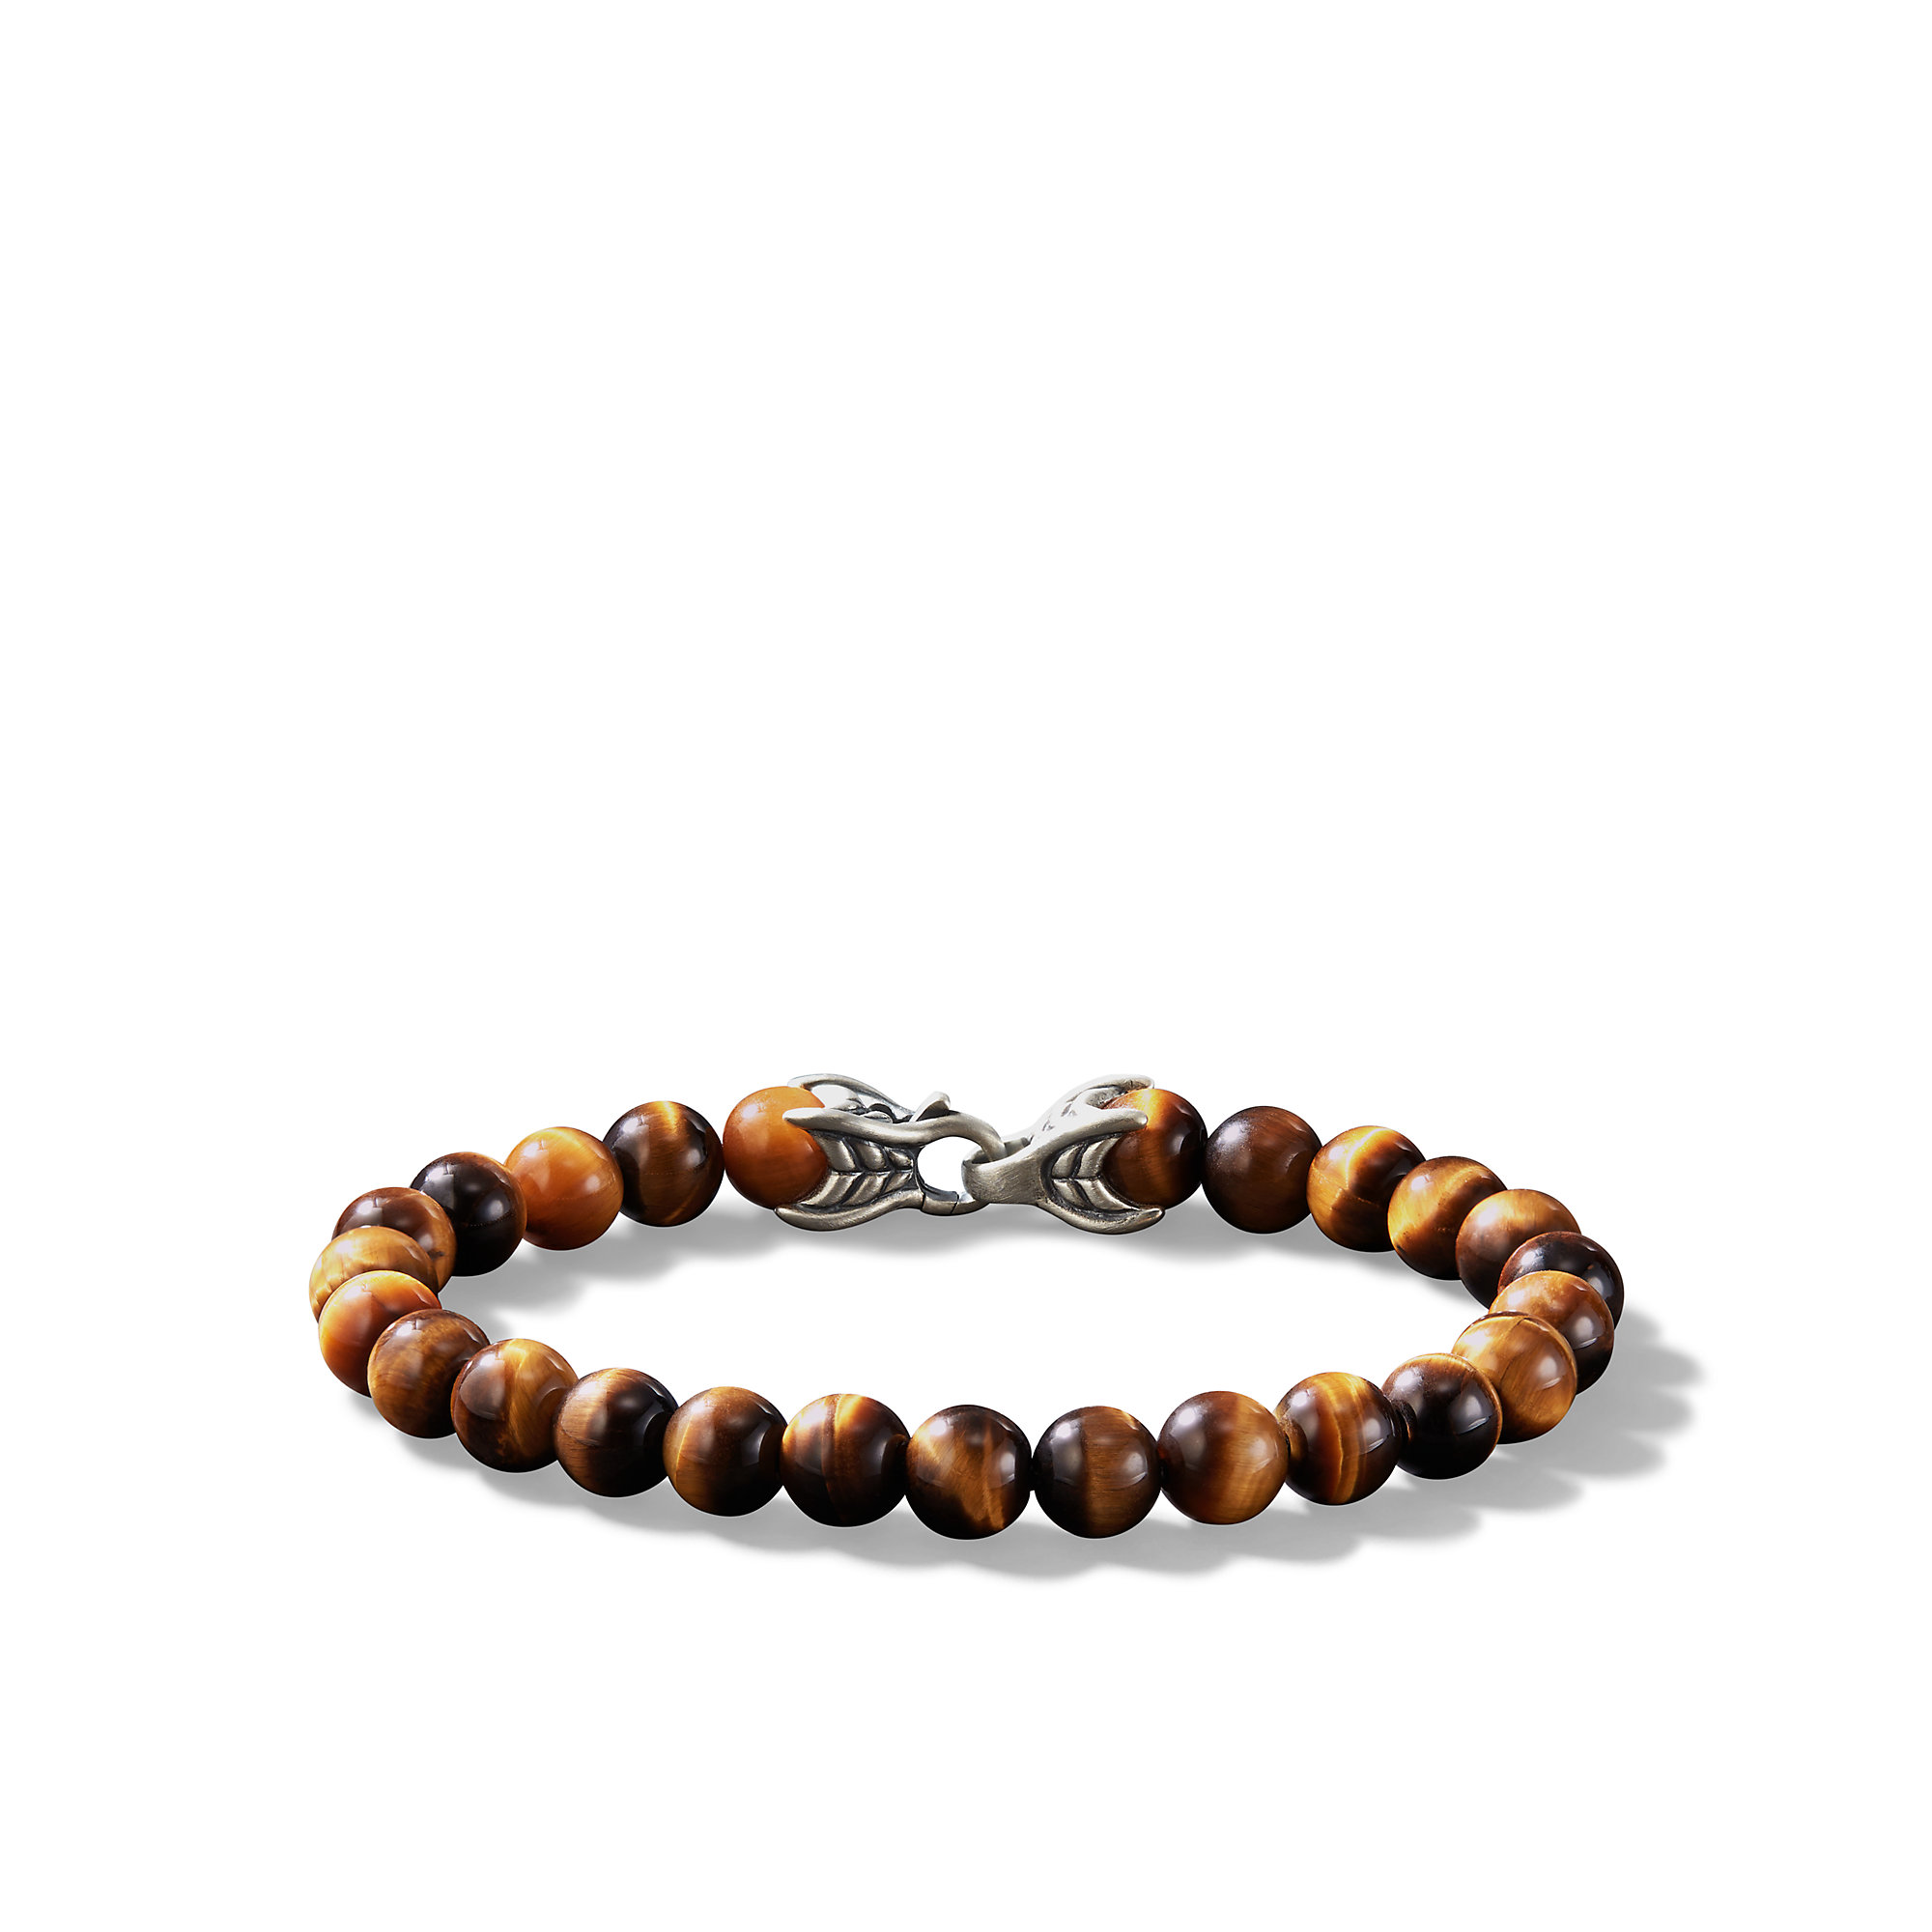 Spiritual Beads Bracelet in Sterling Silver with Tigers Eye, 8mm